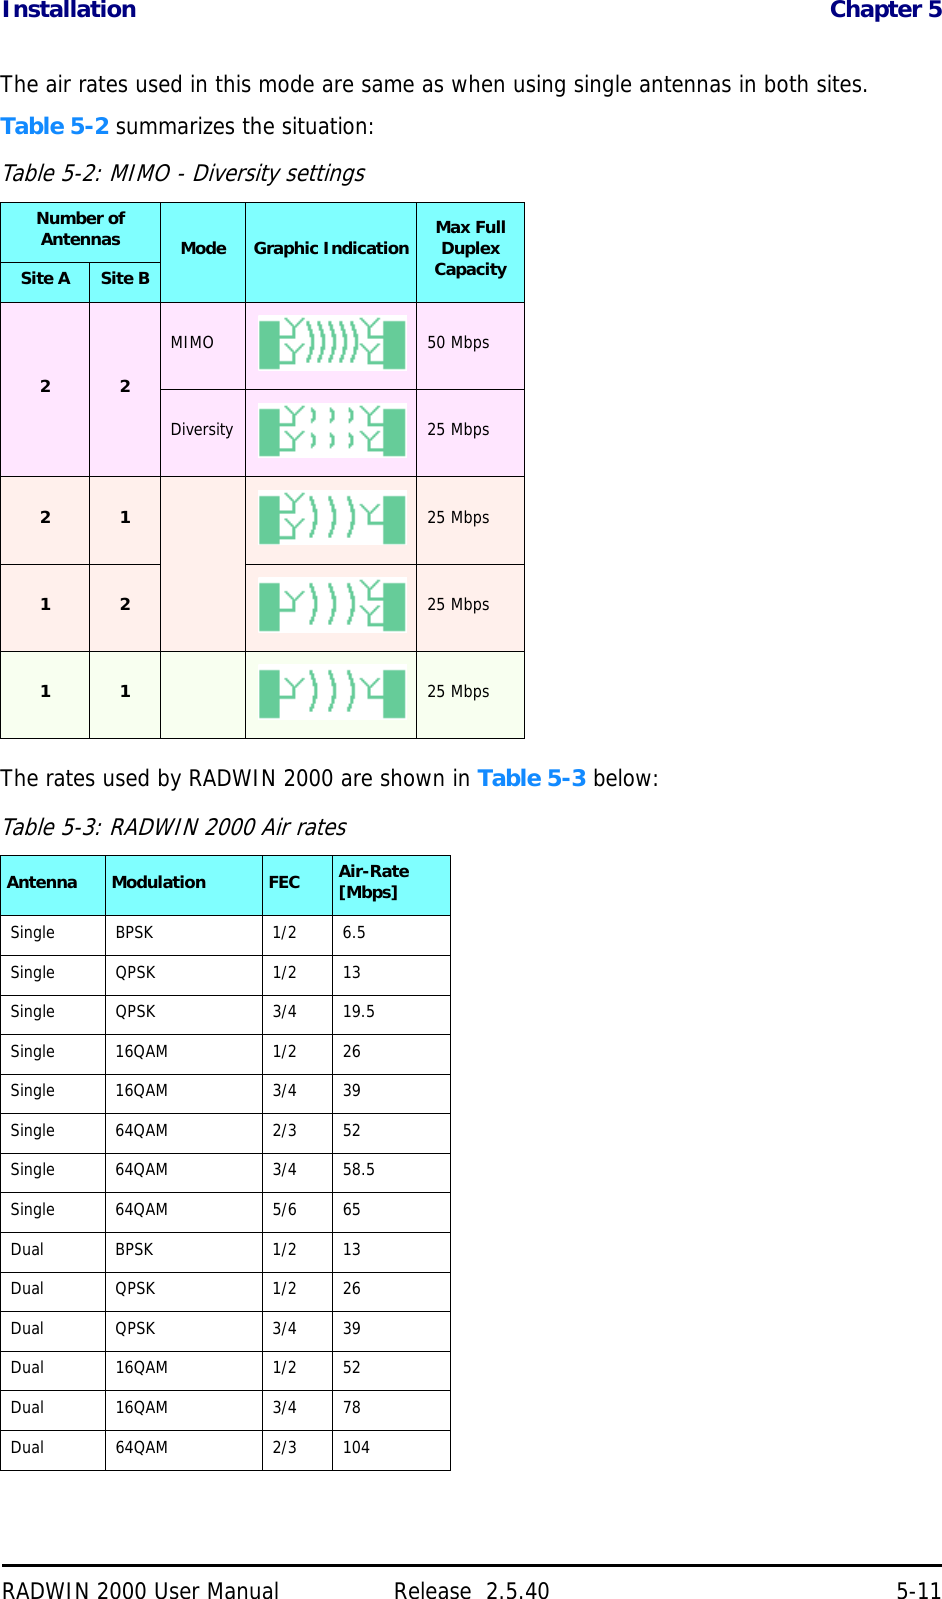 Installation Chapter 5RADWIN 2000 User Manual Release  2.5.40 5-11The air rates used in this mode are same as when using single antennas in both sites.Table 5-2 summarizes the situation:The rates used by RADWIN 2000 are shown in Table 5-3 below:Table 5-2: MIMO - Diversity settingsNumber of Antennas Mode Graphic Indication Max Full Duplex CapacitySite A Site B2 2MIMO 50 MbpsDiversity 25 Mbps2 1 25 Mbps1 2 25 Mbps1 1 25 MbpsTable 5-3: RADWIN 2000 Air ratesAntenna Modulation FEC Air-Rate [Mbps]Single BPSK 1/2 6.5Single QPSK 1/2 13Single QPSK 3/4 19.5Single 16QAM 1/2 26Single 16QAM 3/4 39Single 64QAM 2/3 52Single 64QAM 3/4 58.5Single 64QAM 5/6 65Dual BPSK 1/2 13Dual QPSK 1/2 26Dual QPSK 3/4 39Dual 16QAM 1/2 52Dual 16QAM 3/4 78Dual 64QAM 2/3 104